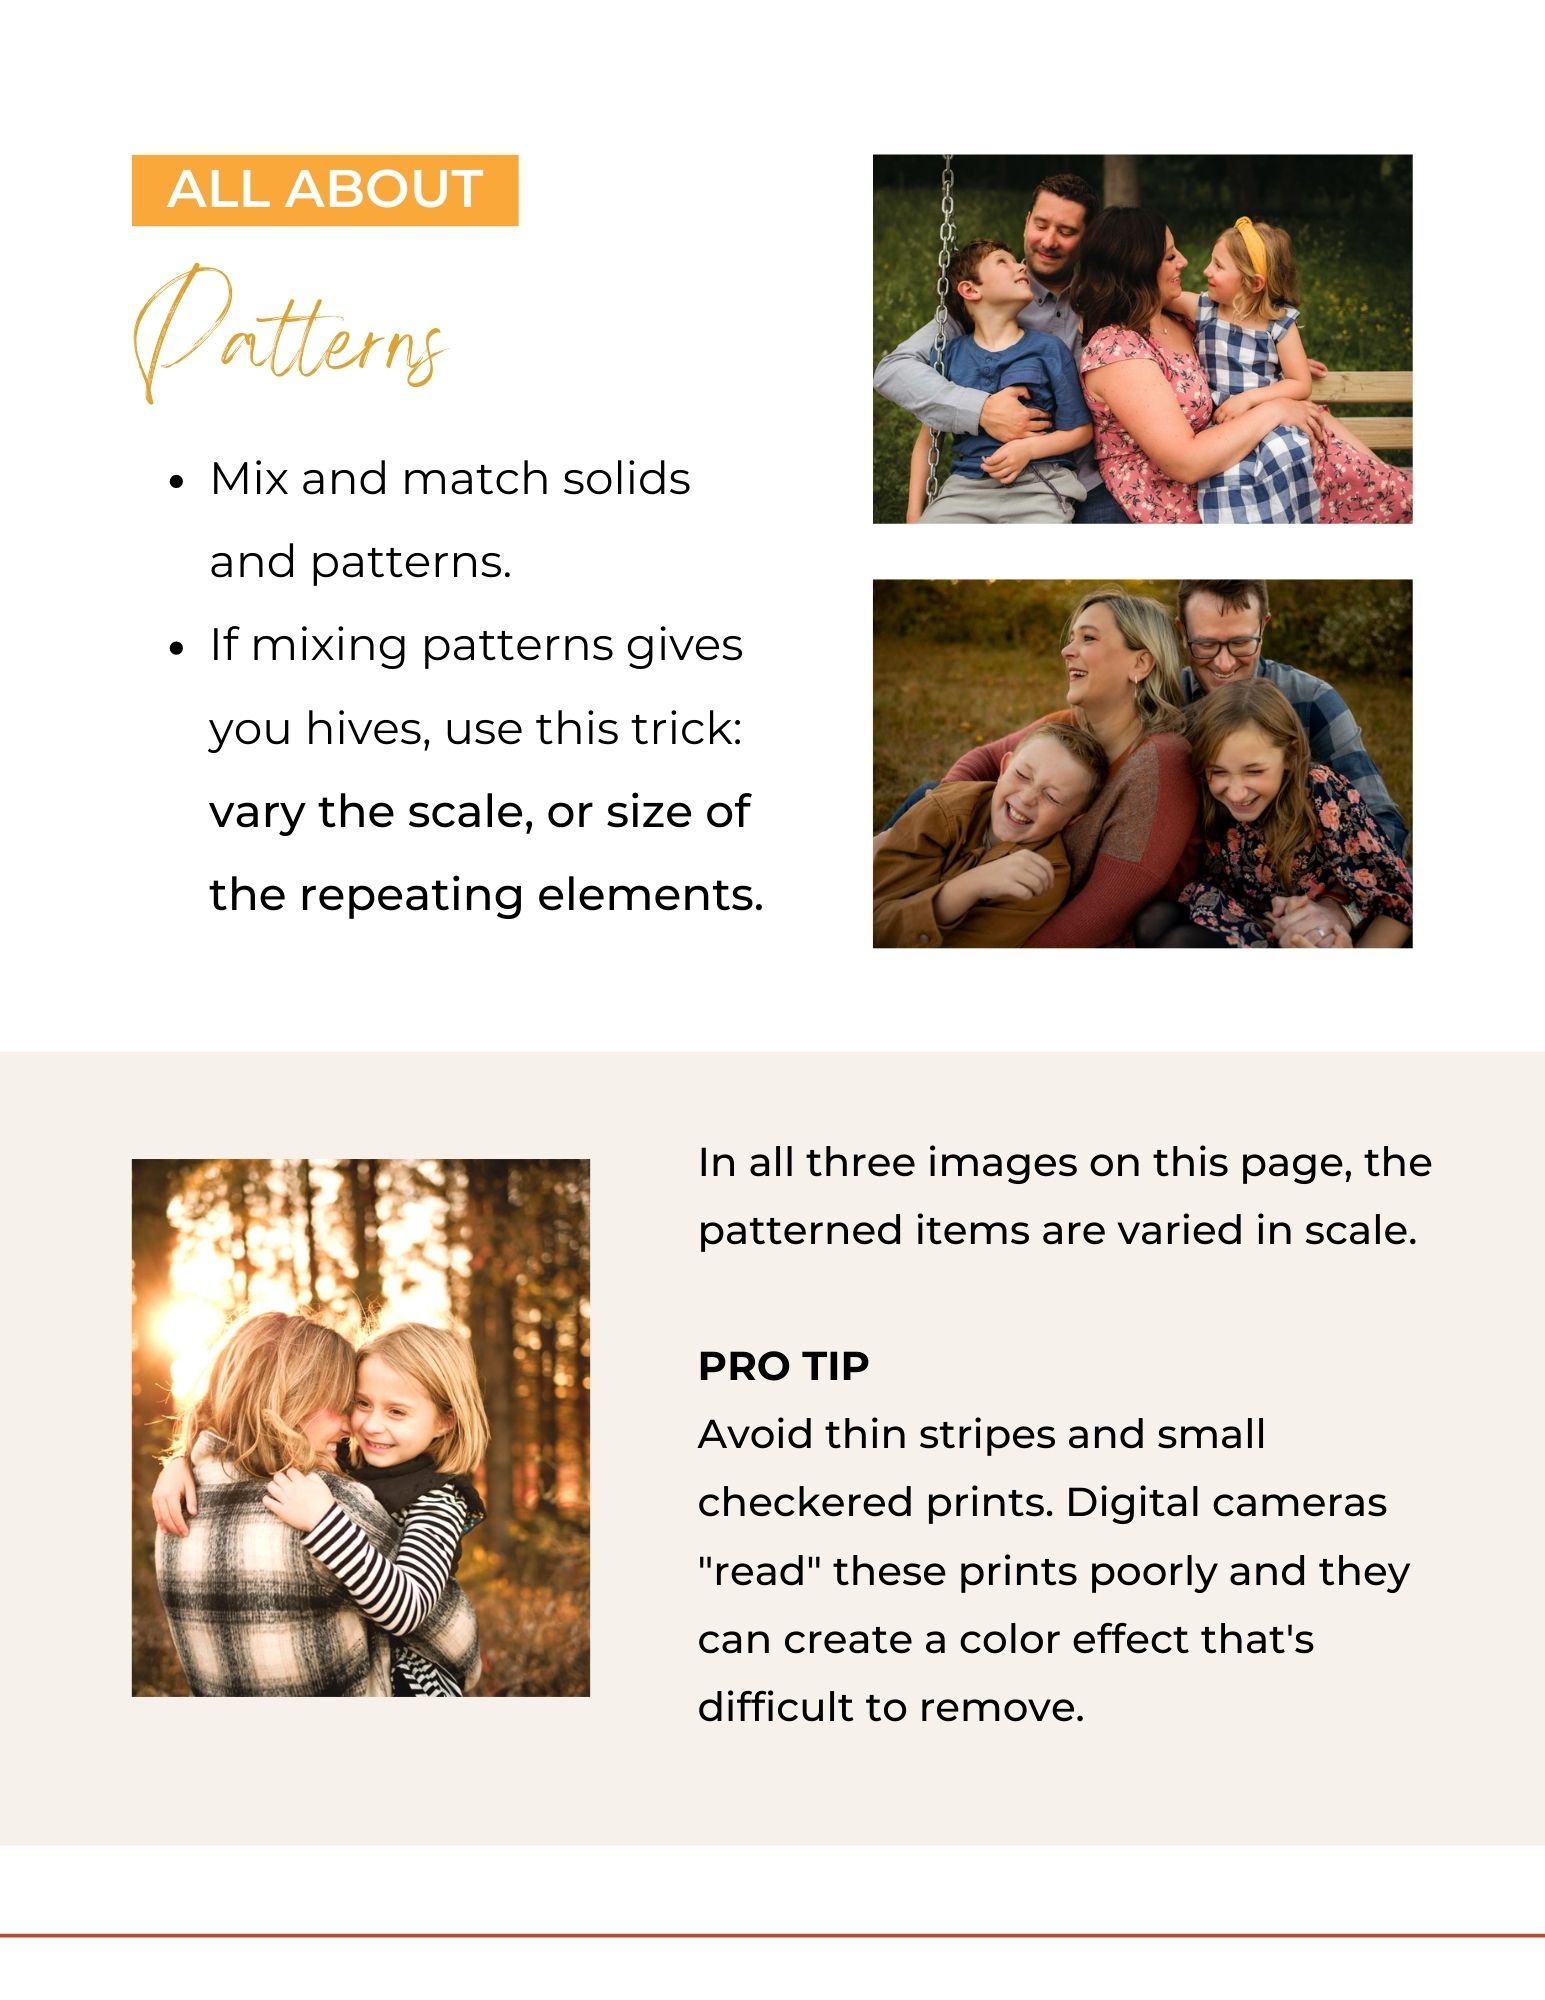 Pattern mixing for family photos